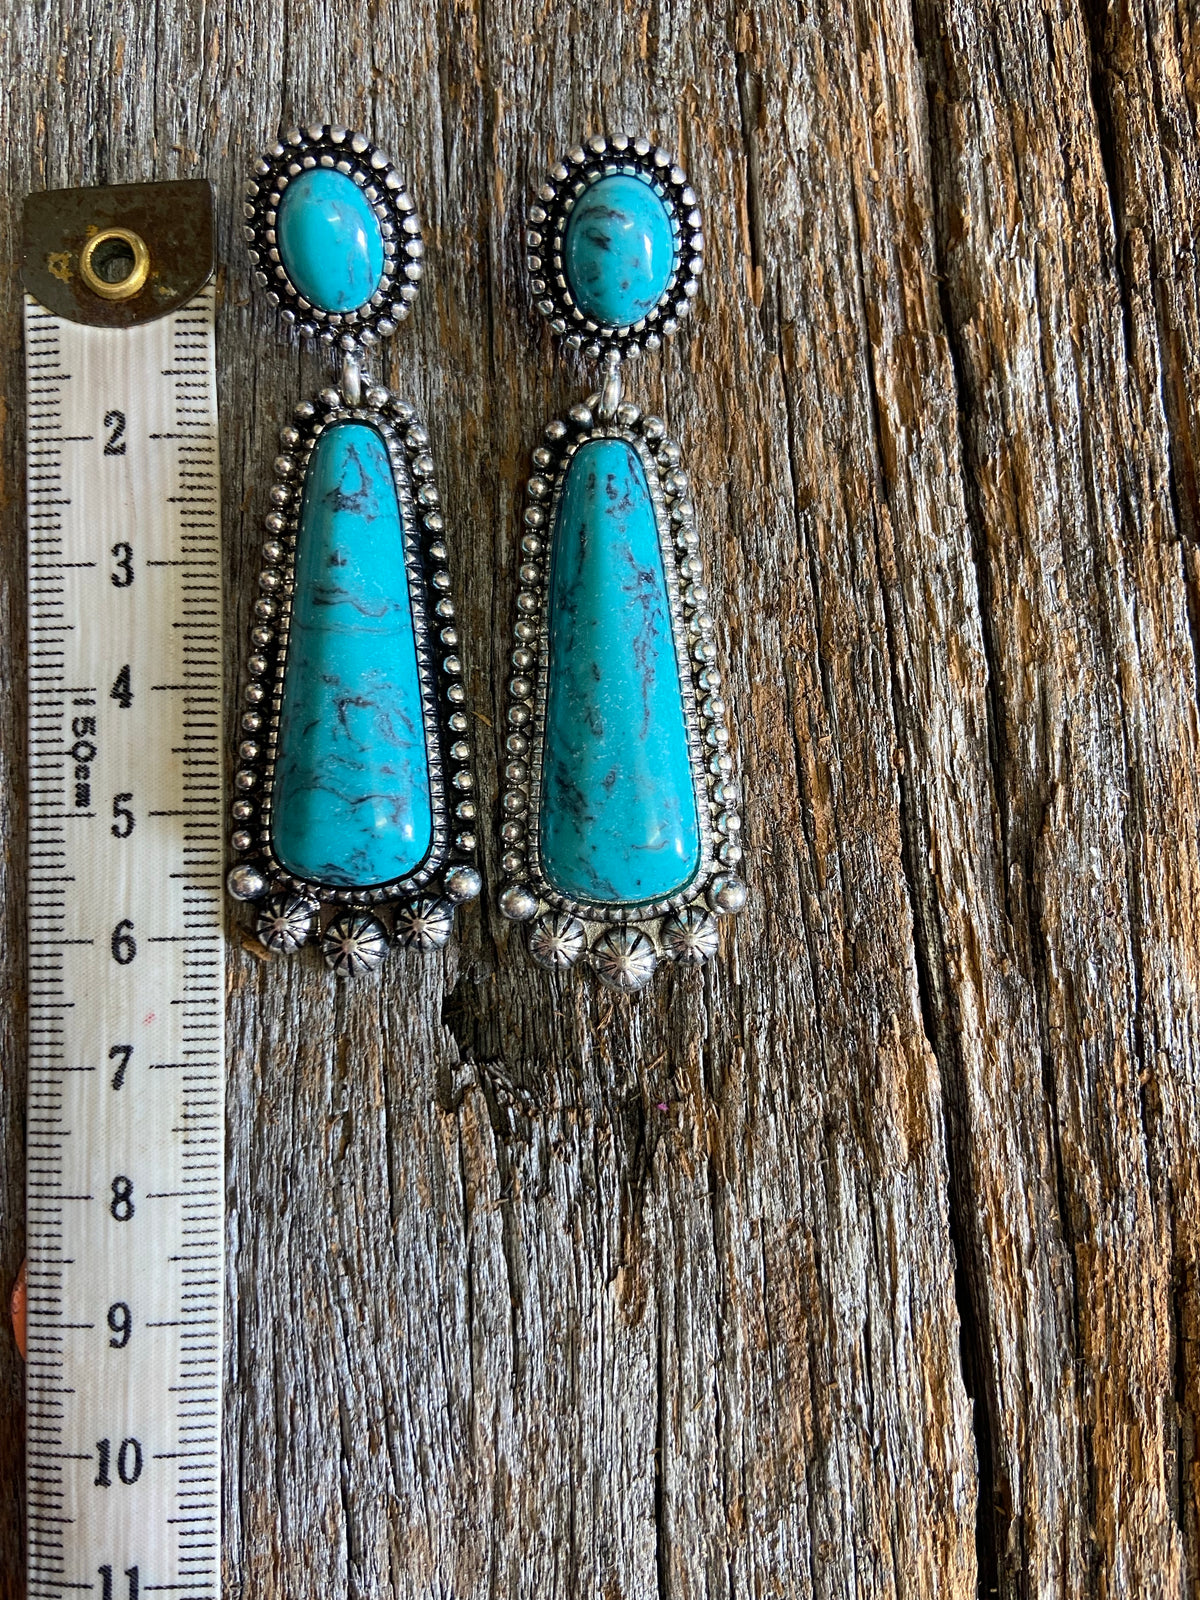 Western Earrings - Antique Silver and Turquoise Stone Earring